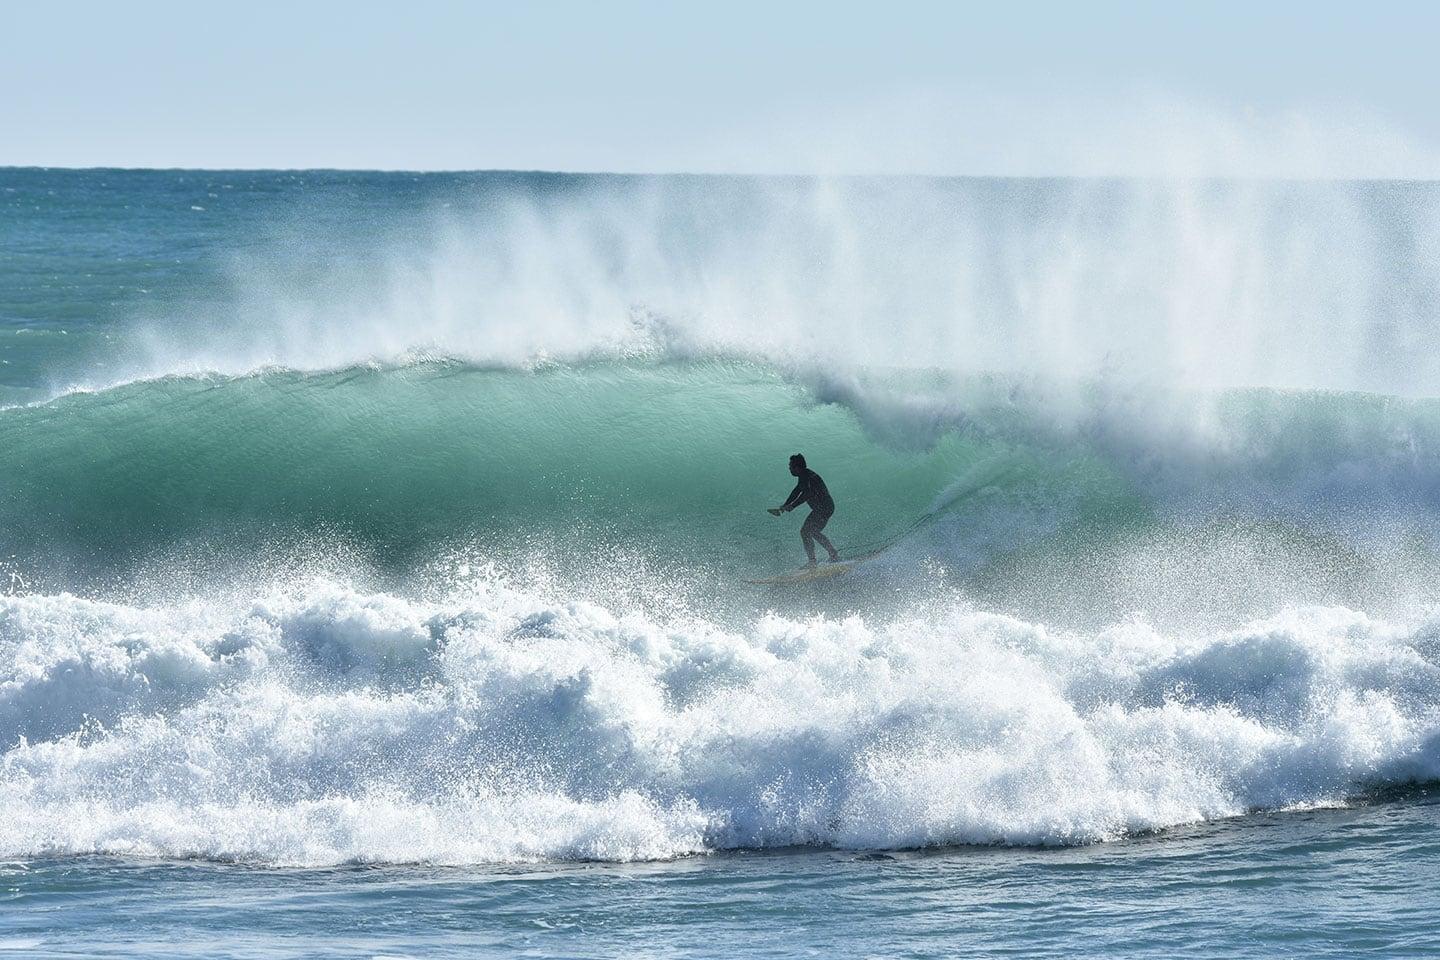 Stoking Out on El Nino’s Winter Swells with Federico Piccinaglia - Naish.com